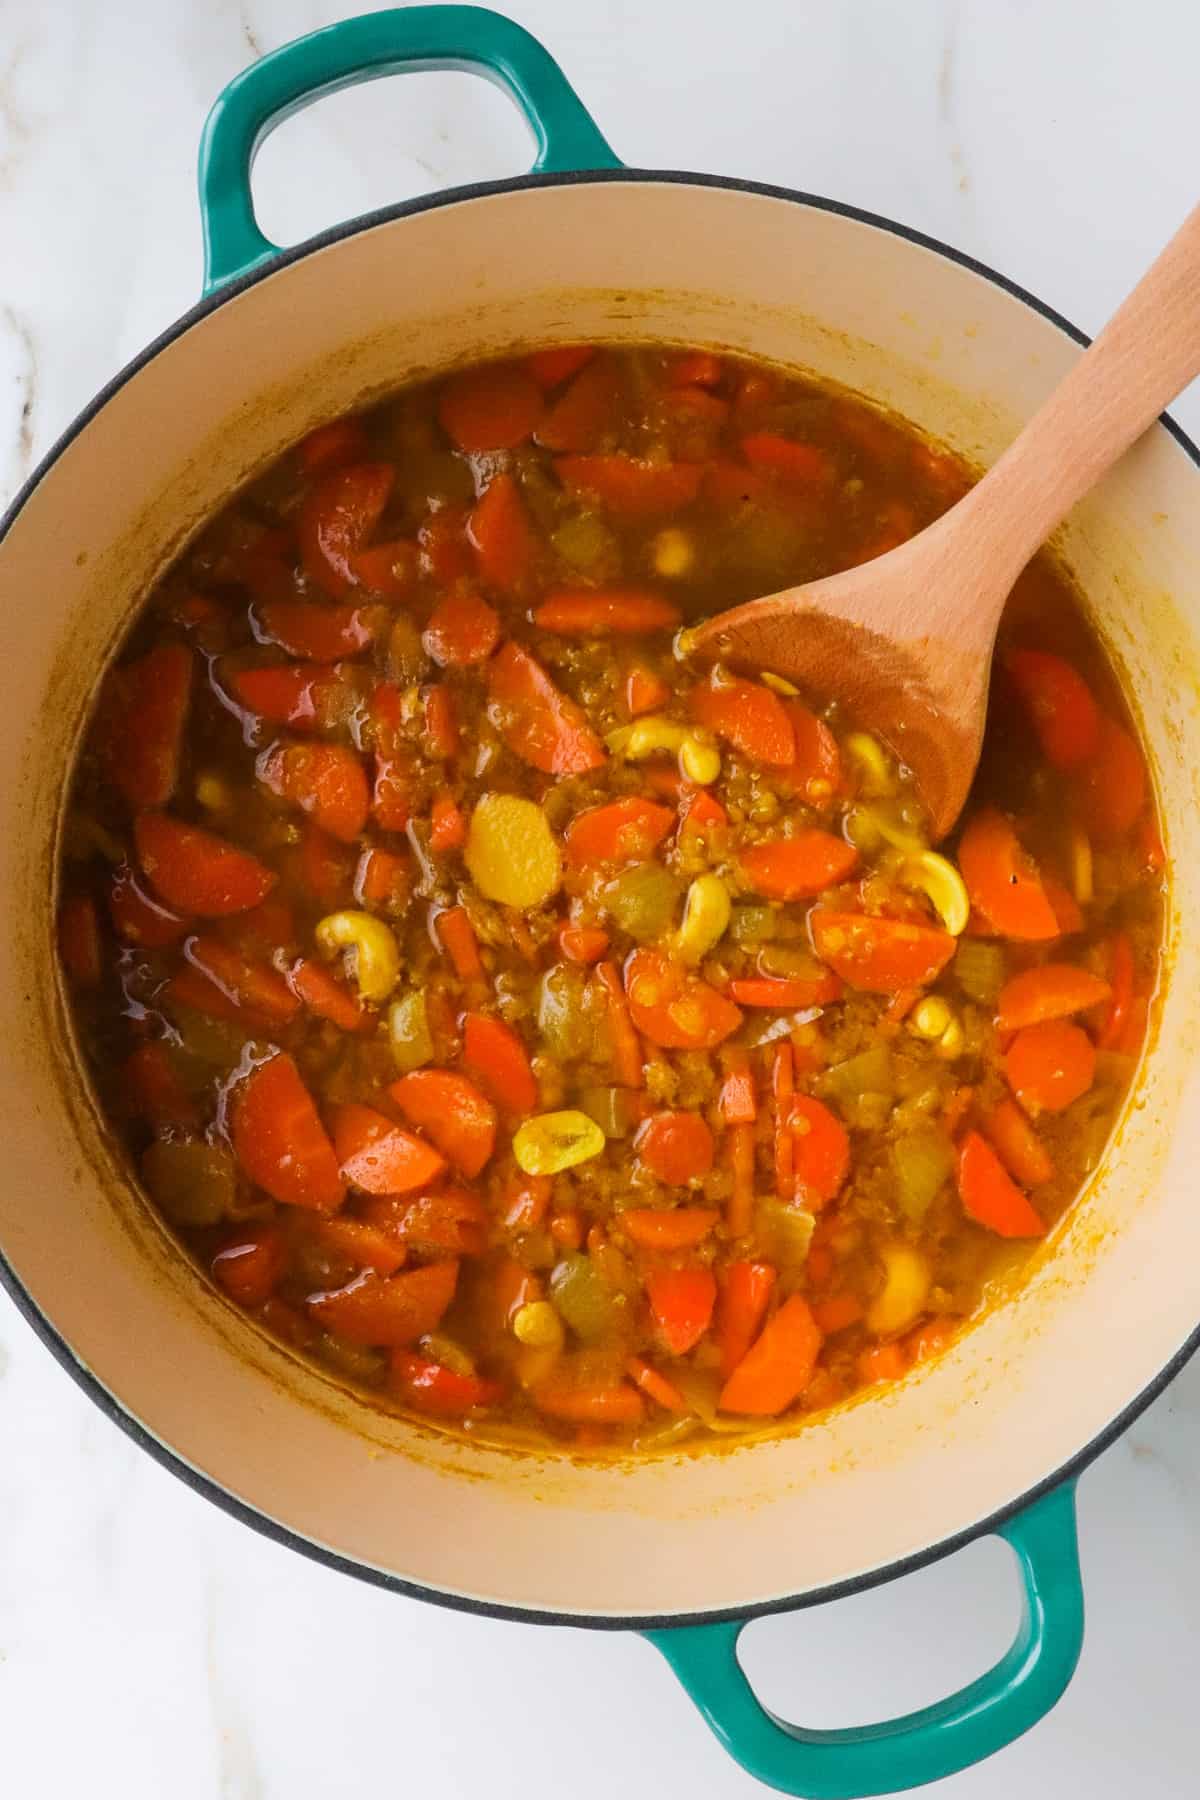 Cooked soup in pot.